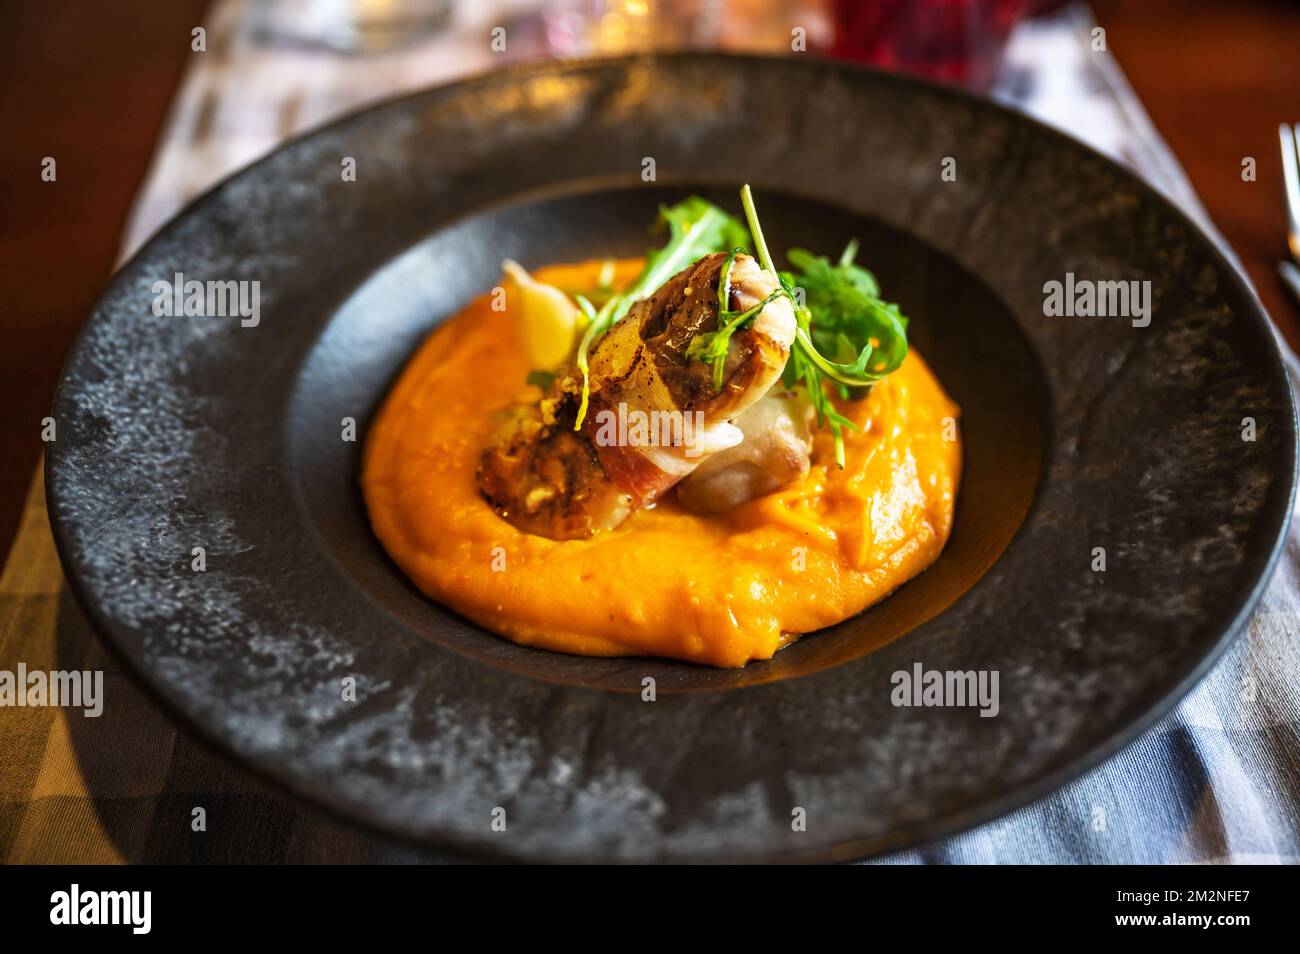 Fried zander fillet with bacon on pumpkin puree, rucola leaf in black plate on restaurant table, closeup. Stock Photo